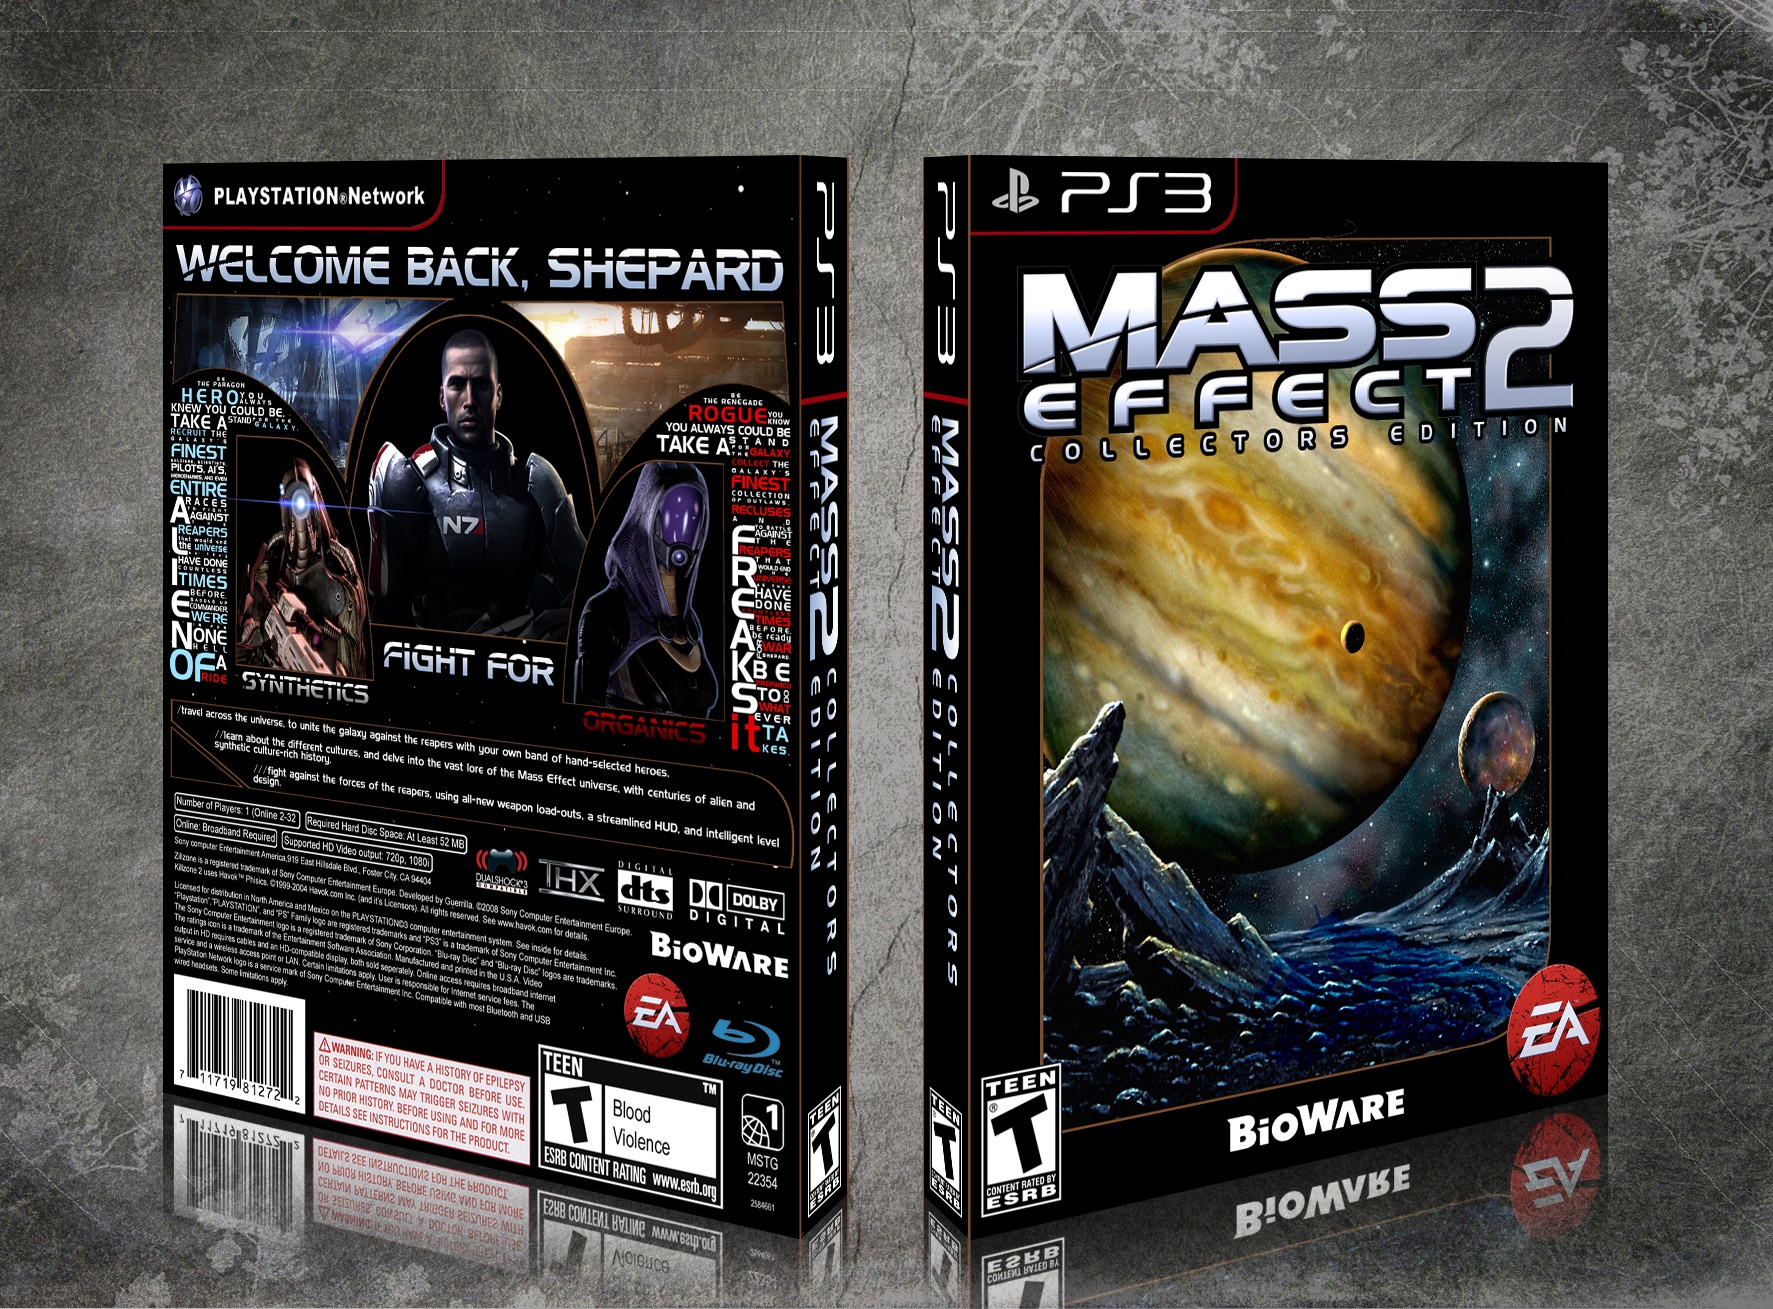 Mass Effect 2 Collector's Edition box cover